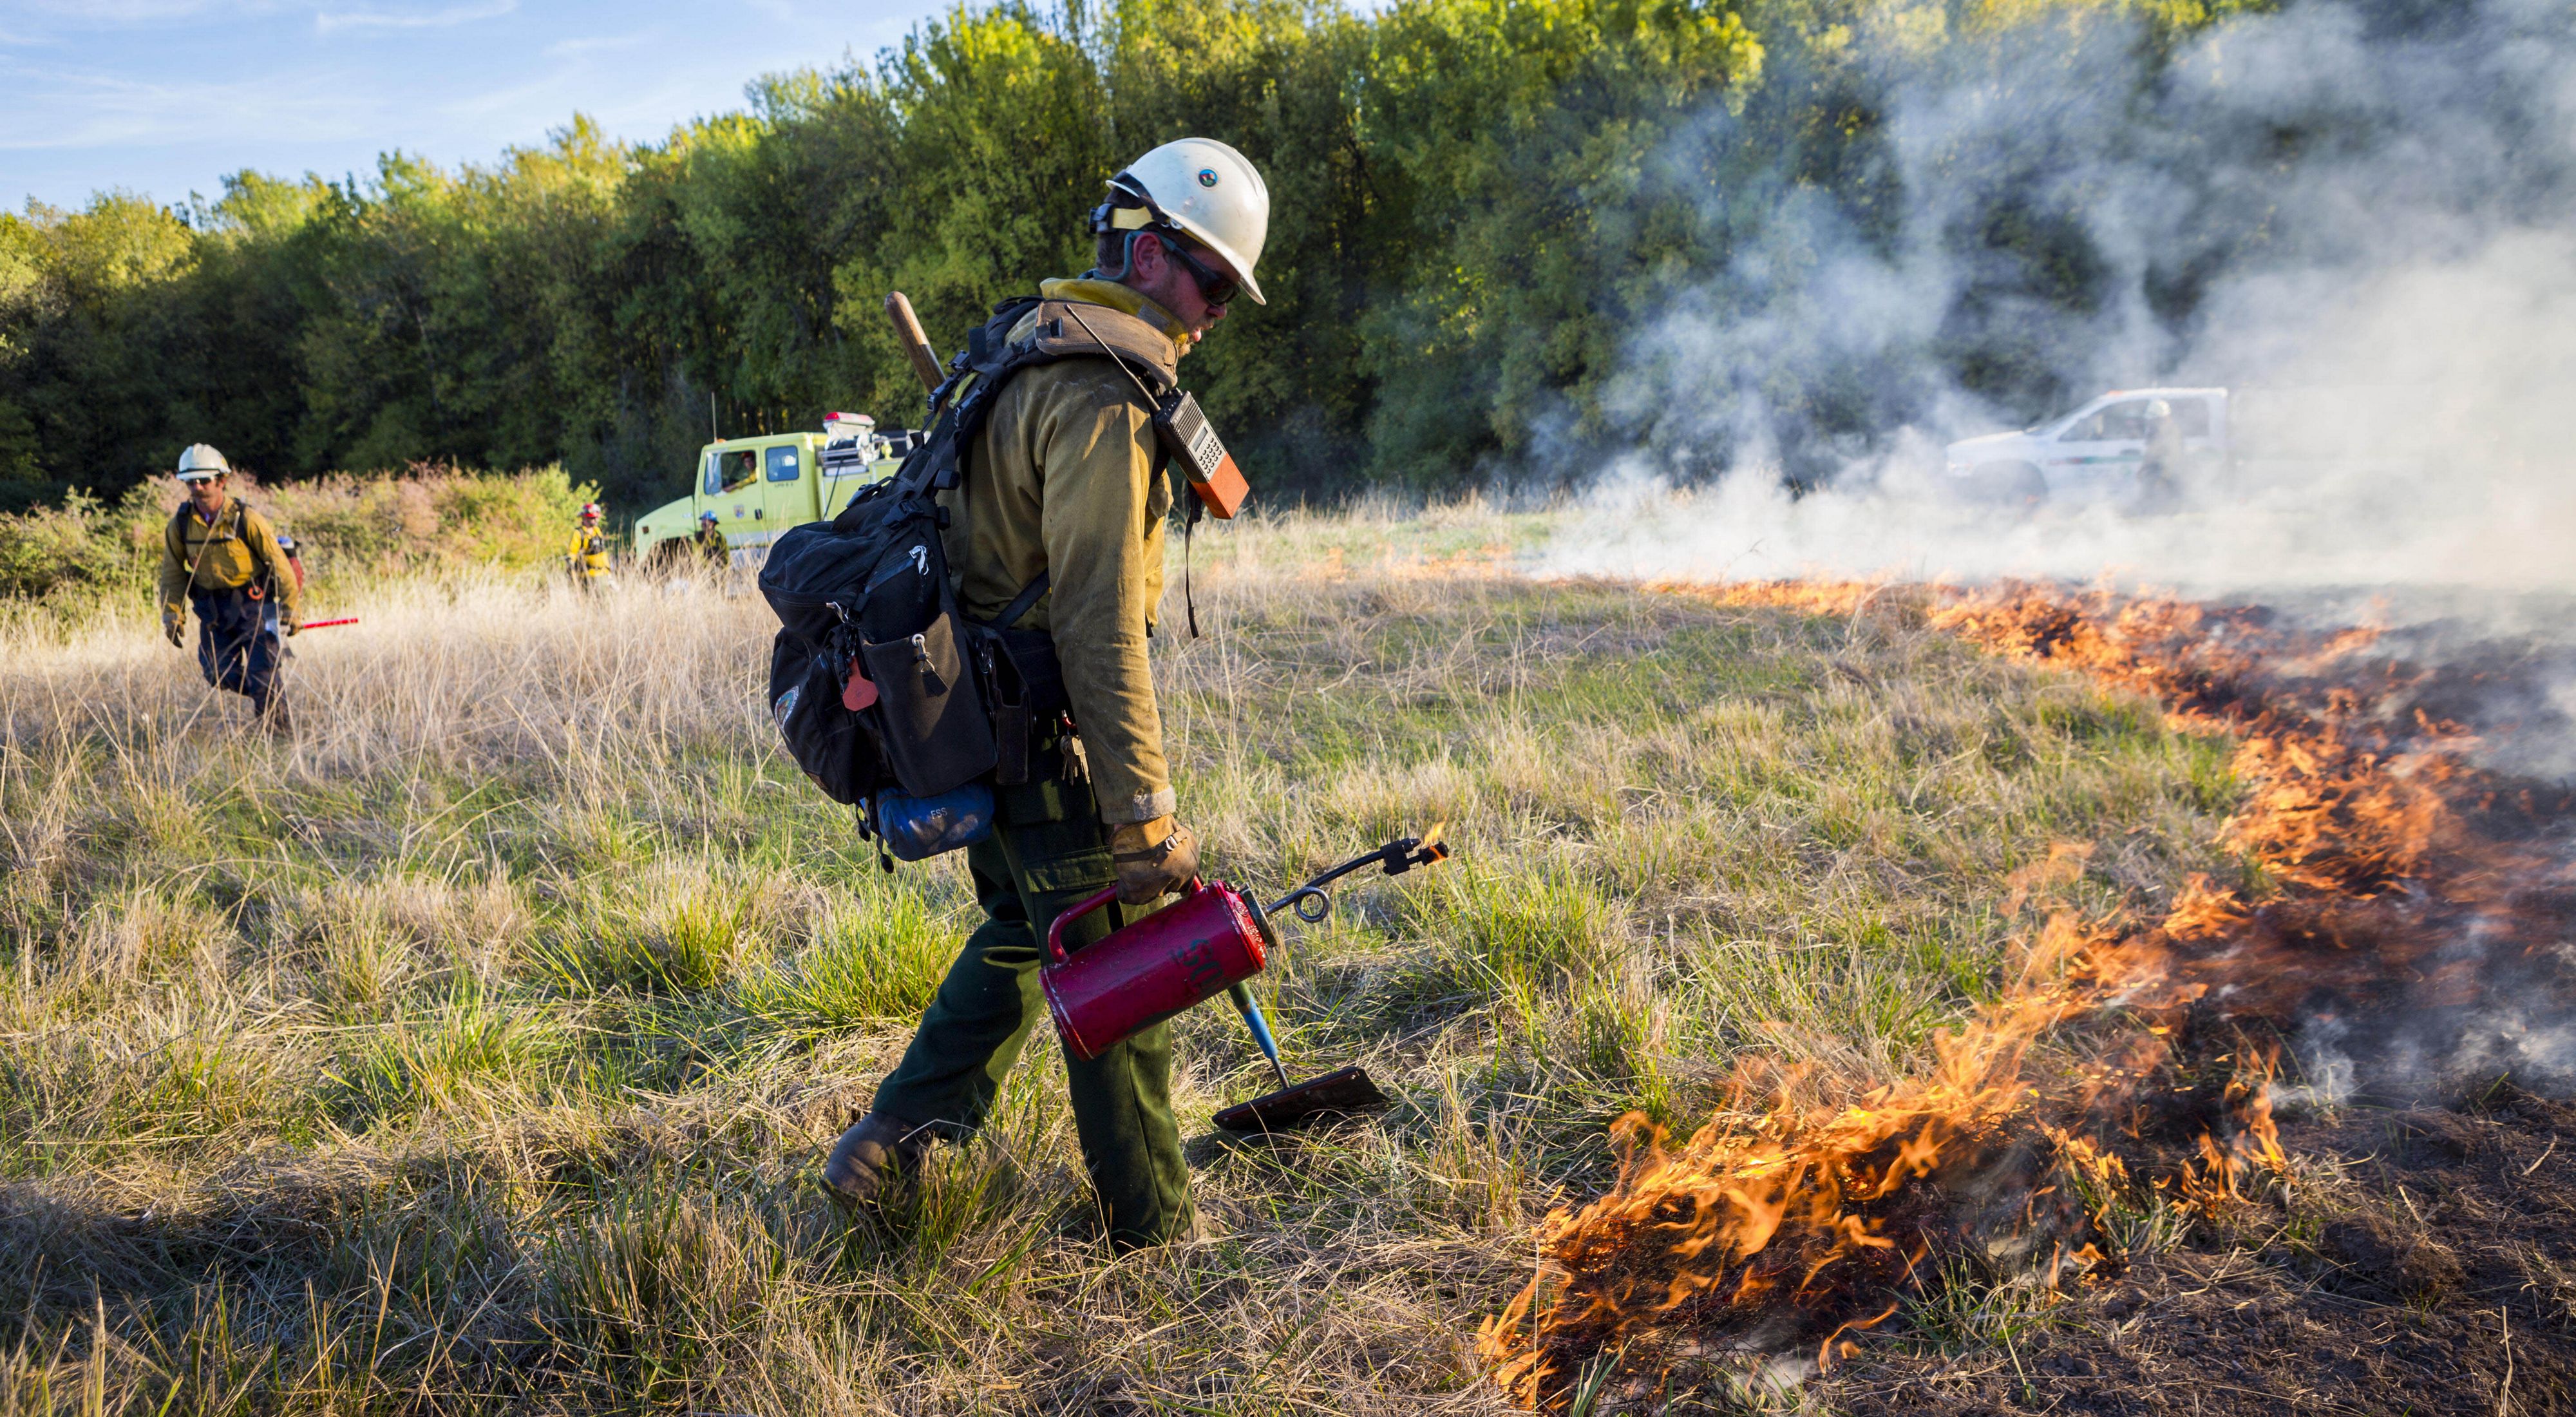 A fire worker uses a drip torch to ignite grass in a controlled burn on grasslands in Willamette Valley in Oregon.